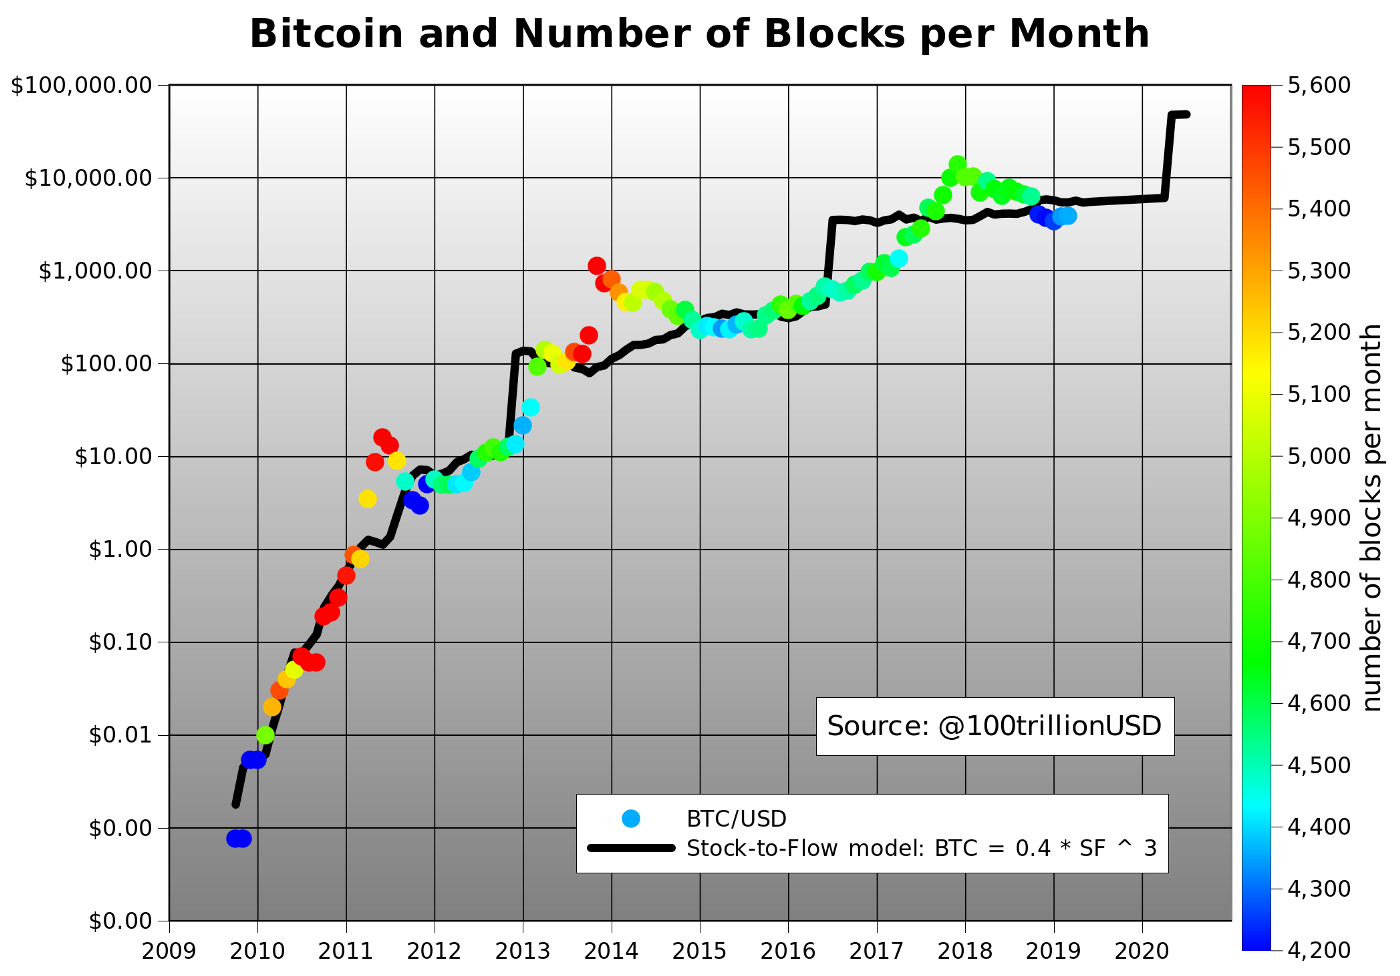 Bitcoin stock to flow model